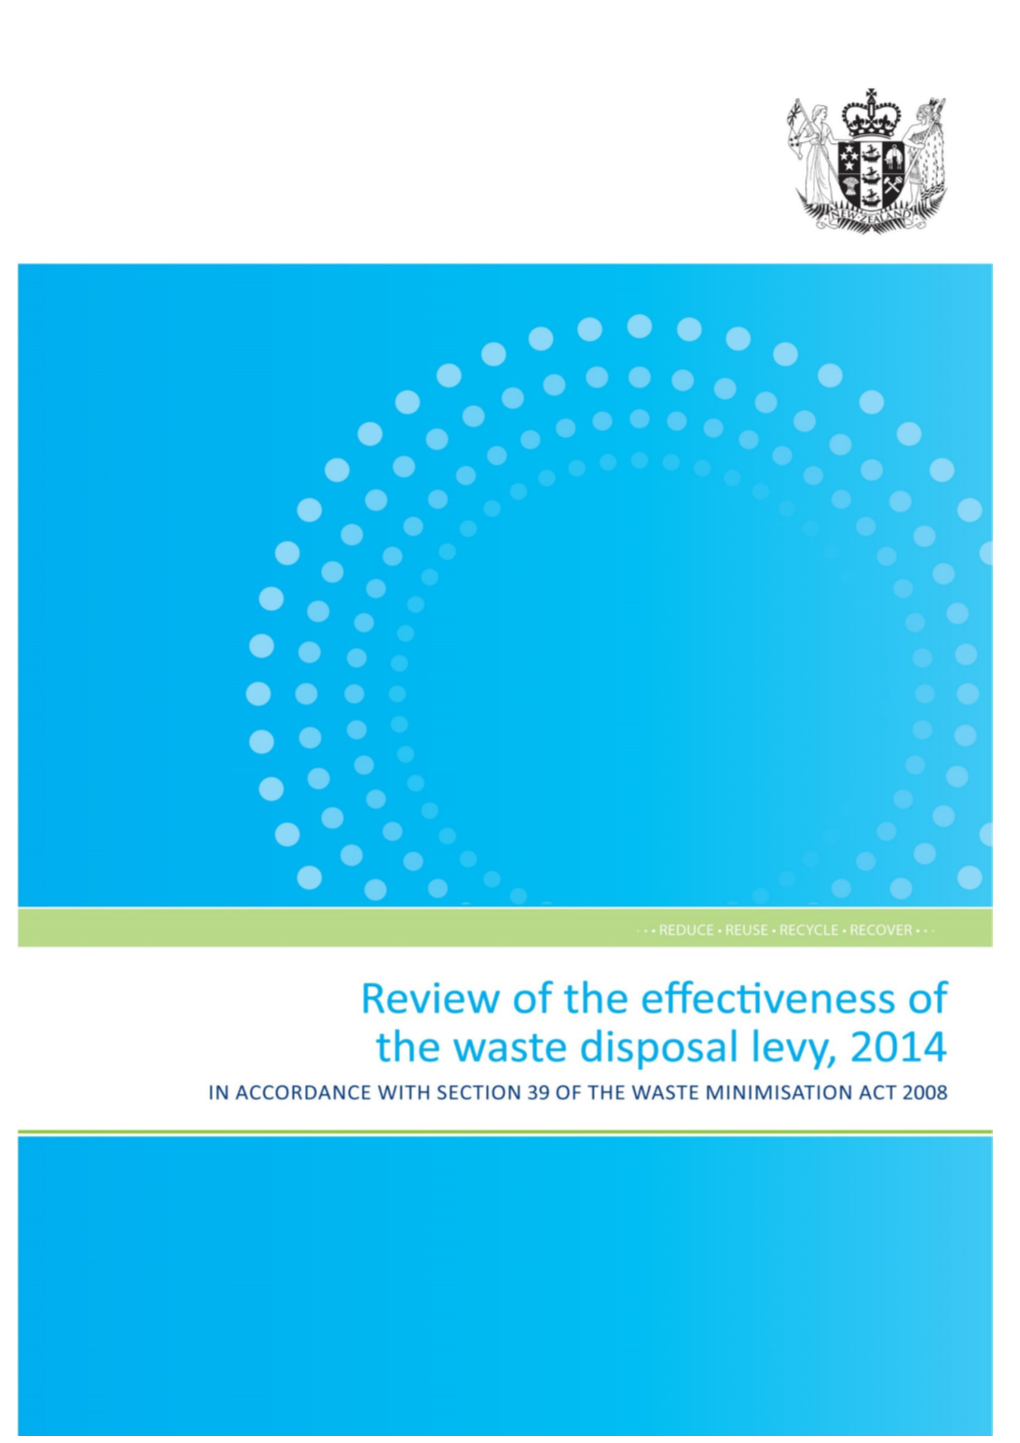 Waste-Disposal-Levy-Review-2014-Final